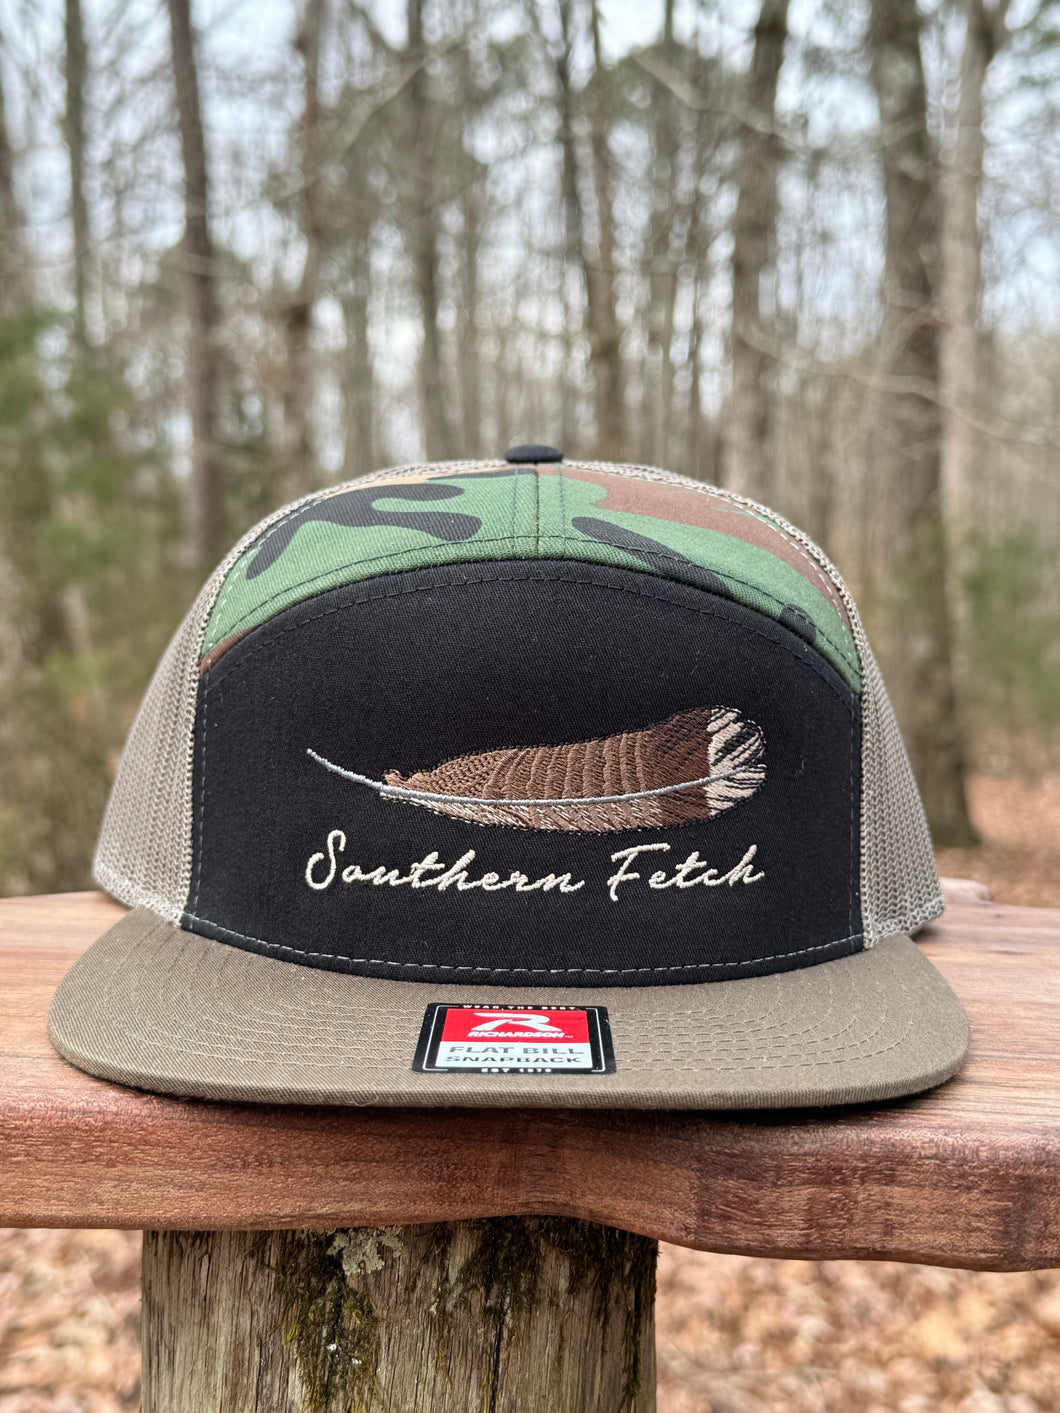 Turkey Feather 7 Panel Hat – Southern Fetch